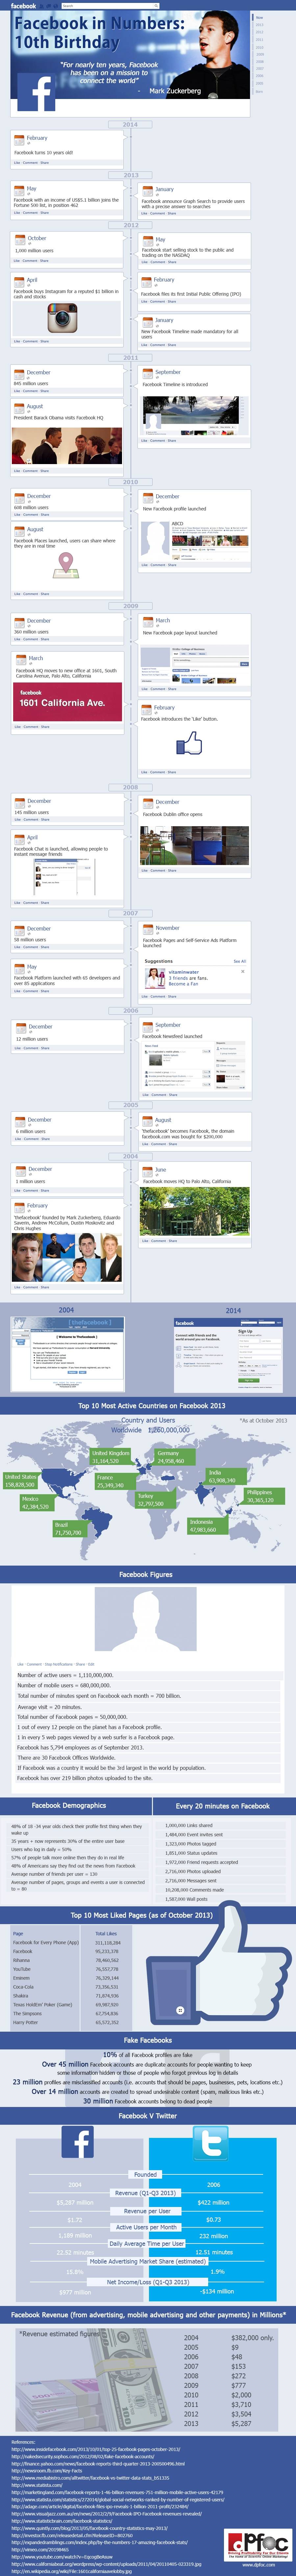 Facebook Celebrate 10 Years: There Milestones In Infographic